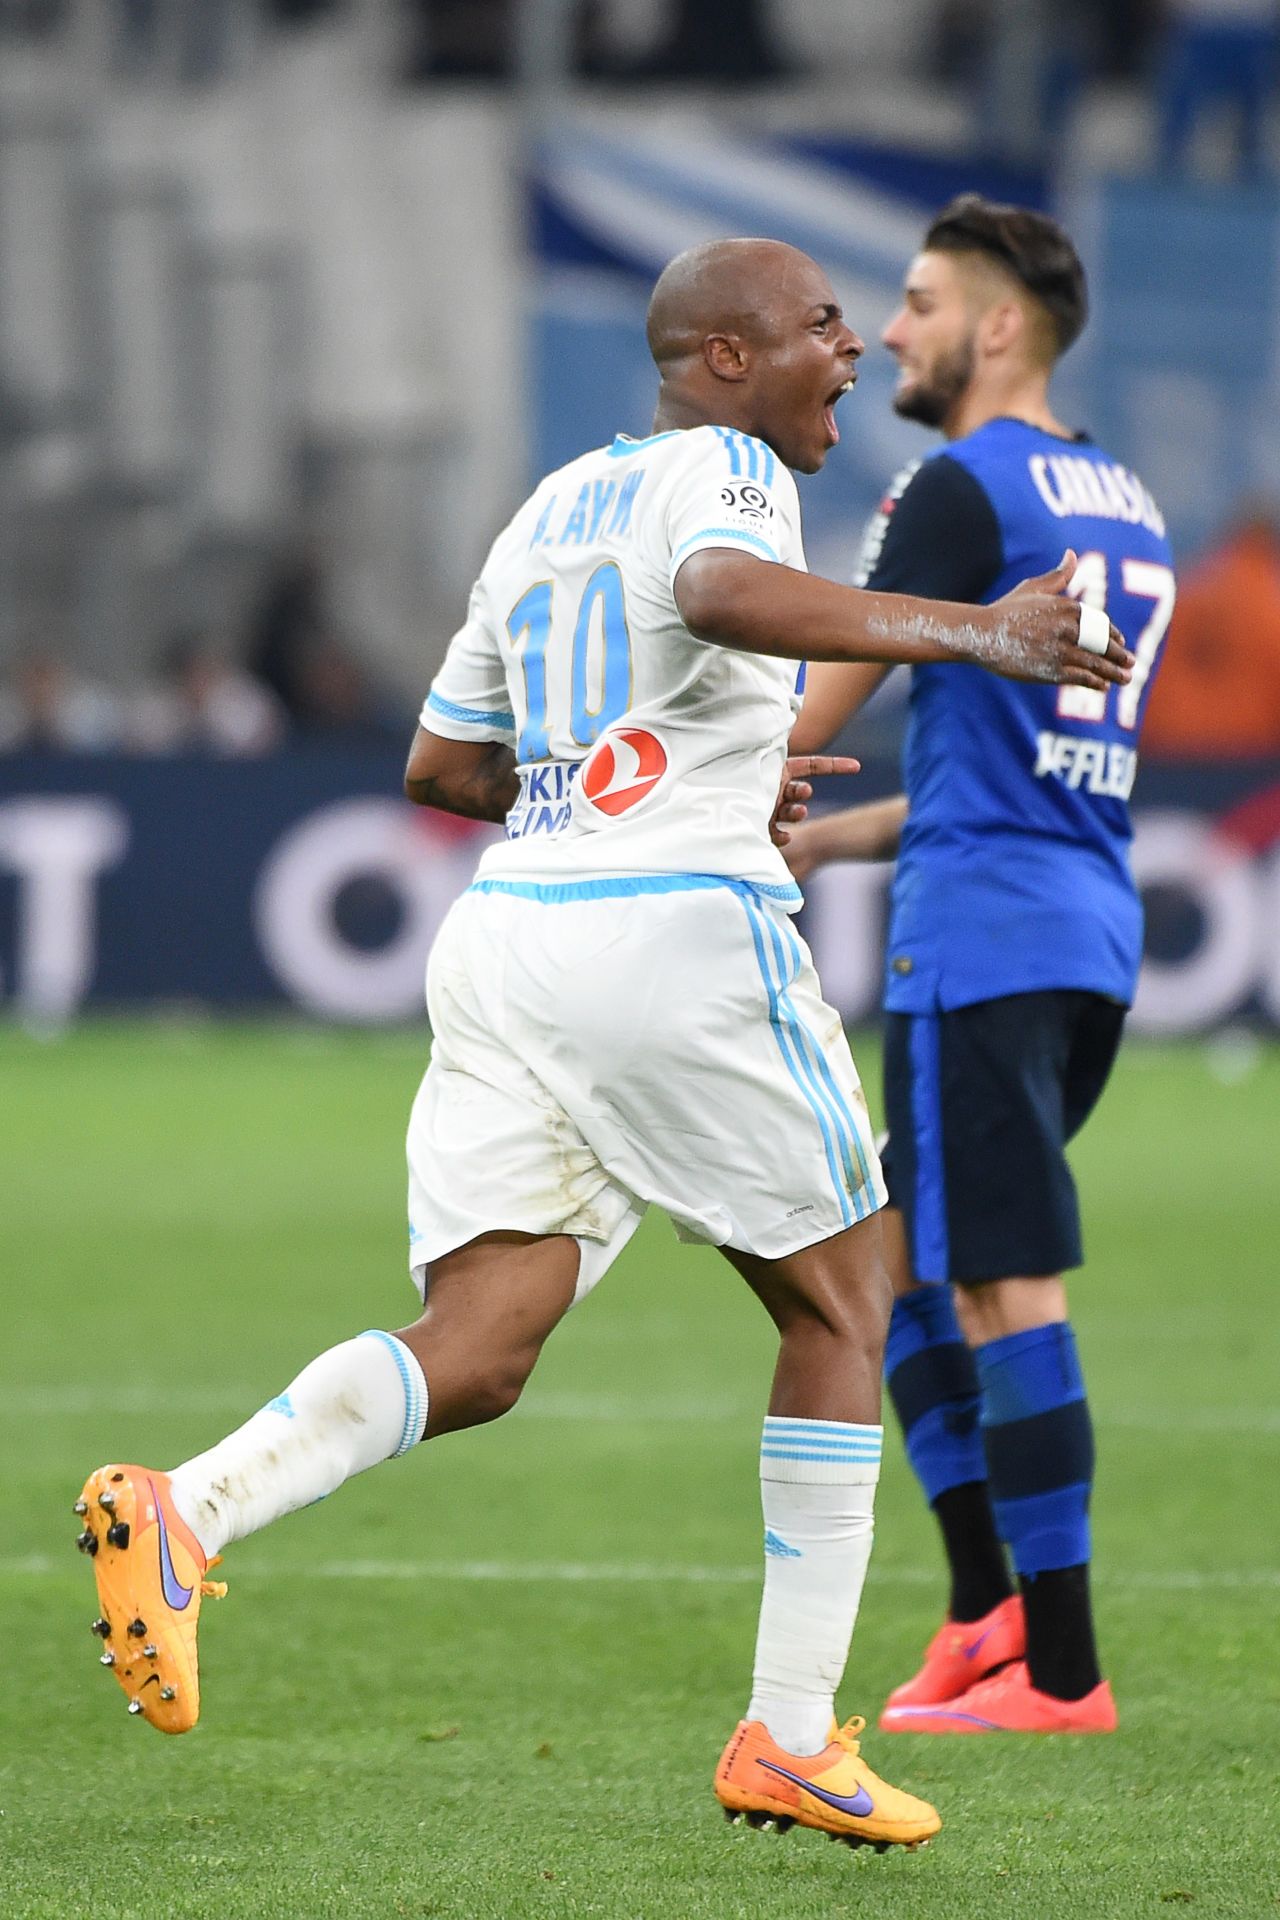 Andre Ayew celebrates drawing Marseille level in their Ligue 1 match against Monaco. Romain Alessandrini completed the comeback in the 87th minute to secure a first win in five matches for Marcelo Bielsa's side.